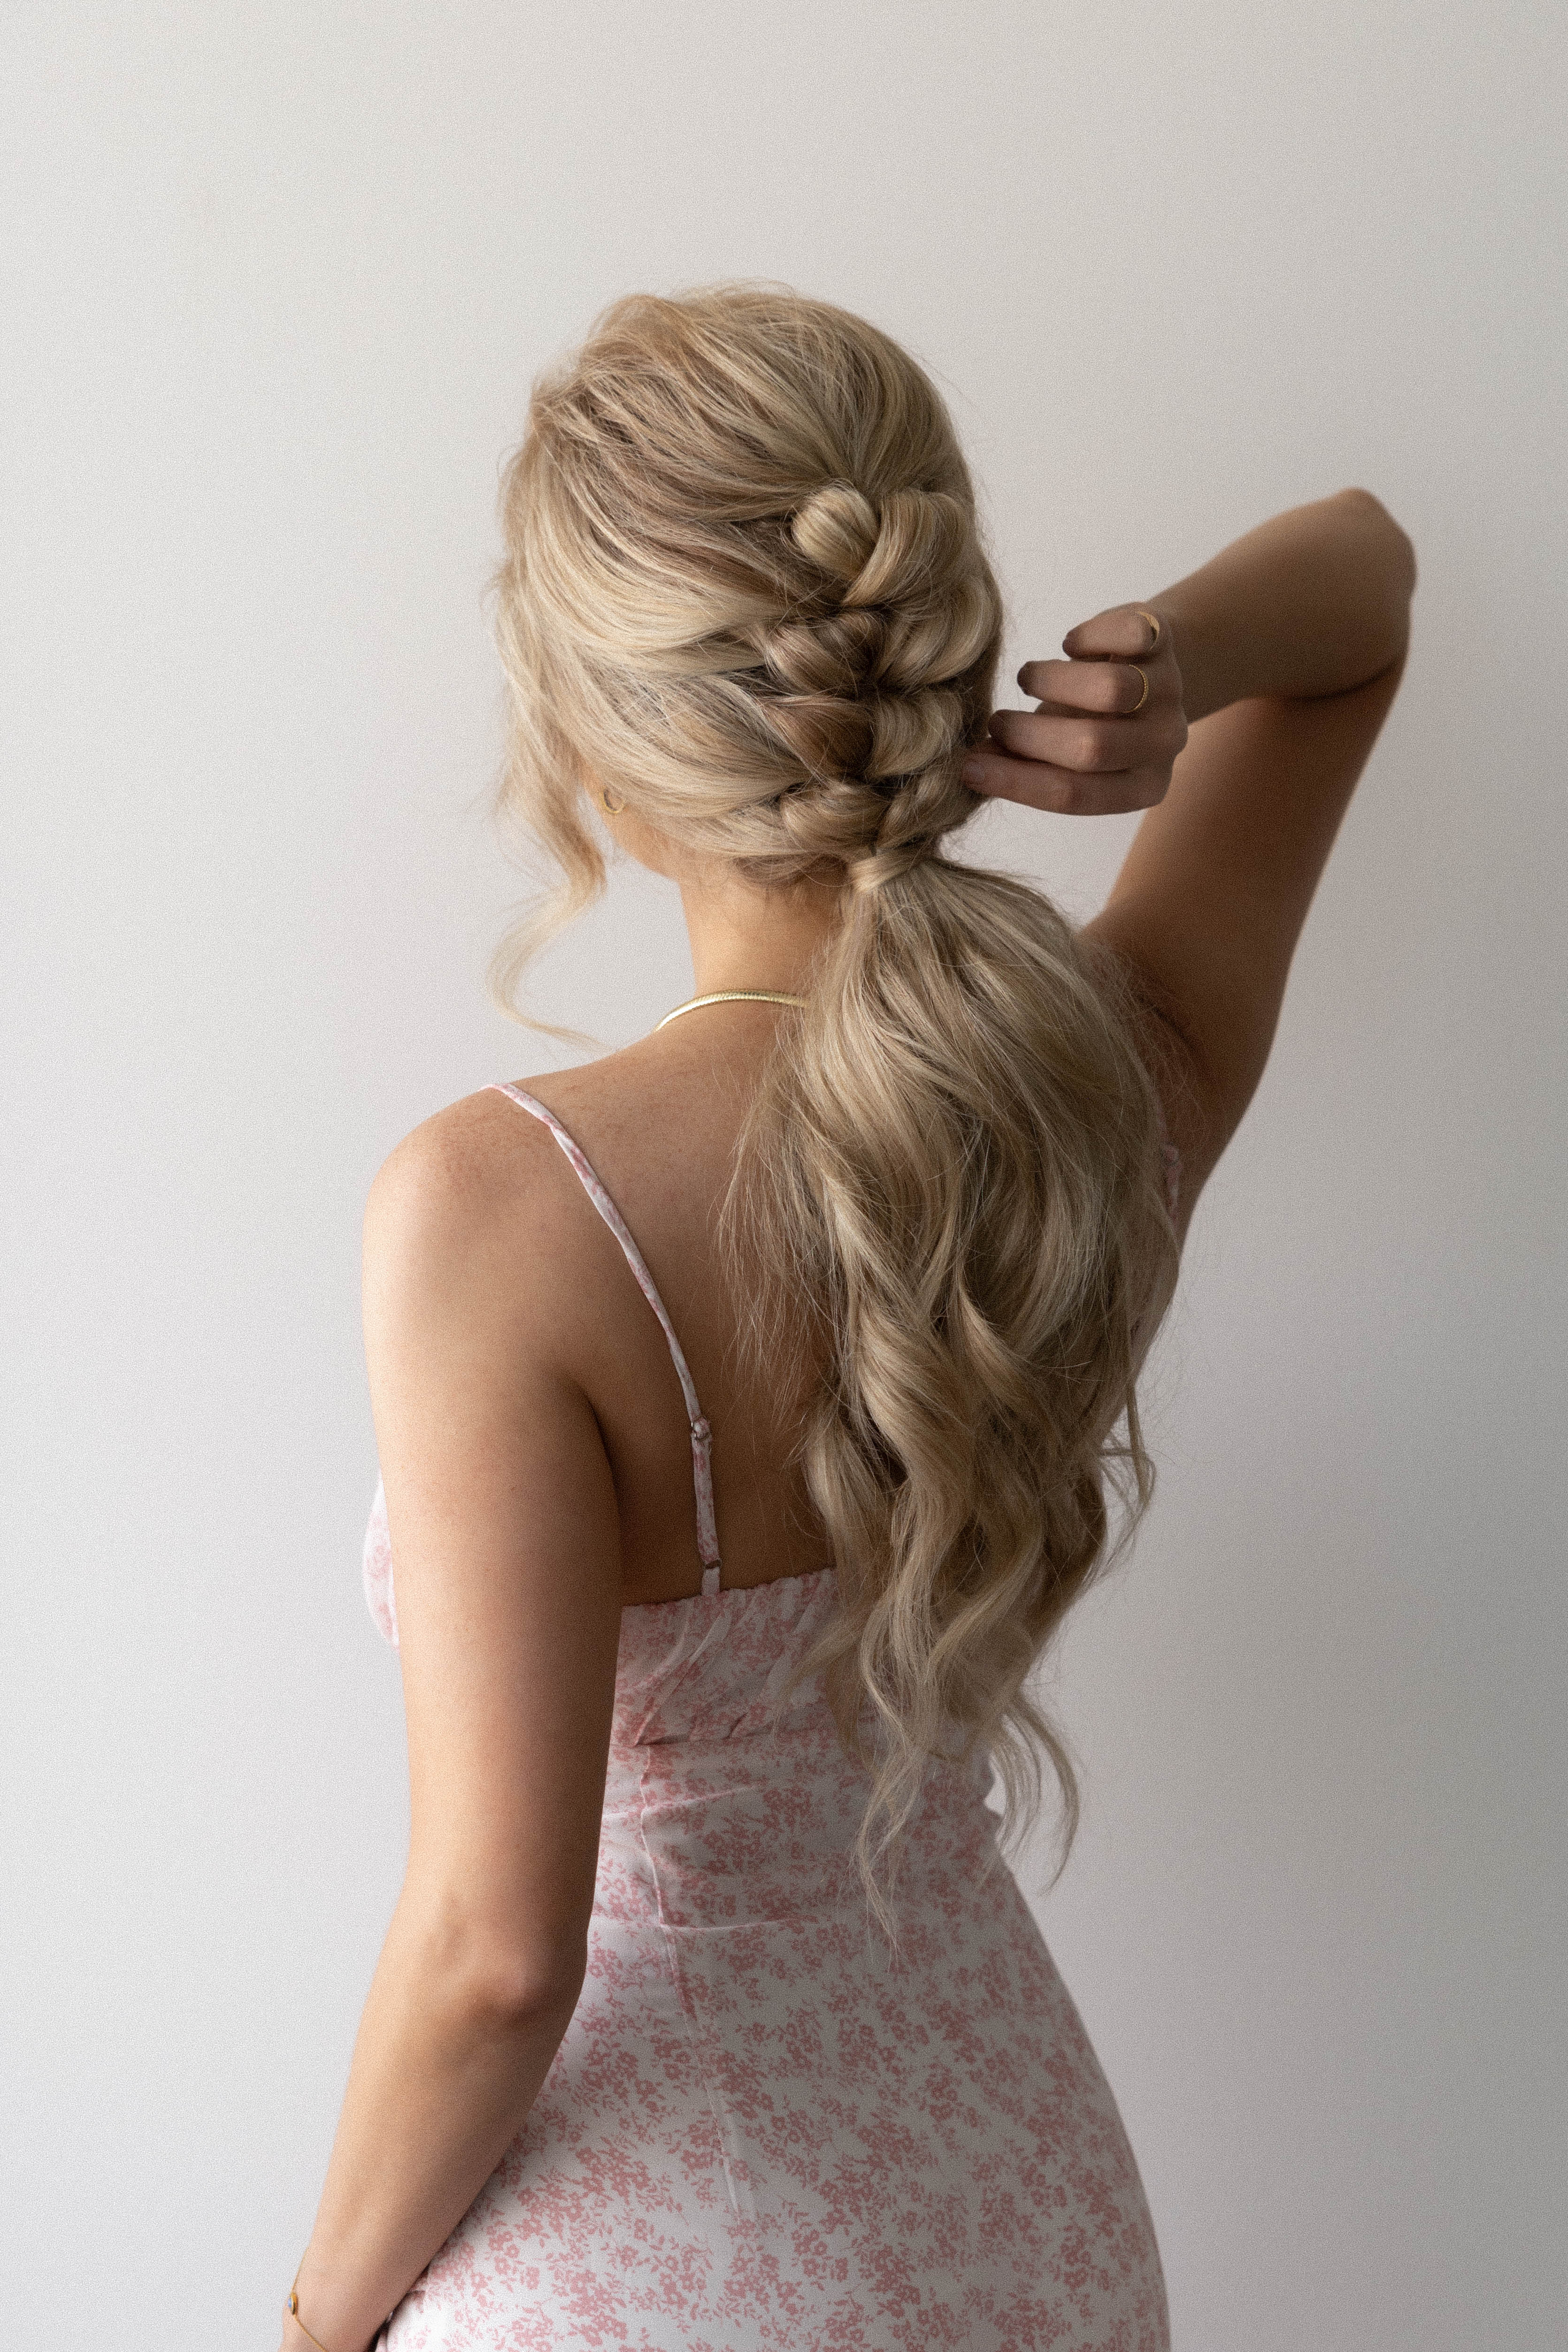 PONYTAIL HARSTYLE FOR SUMMER - Alex Gaboury